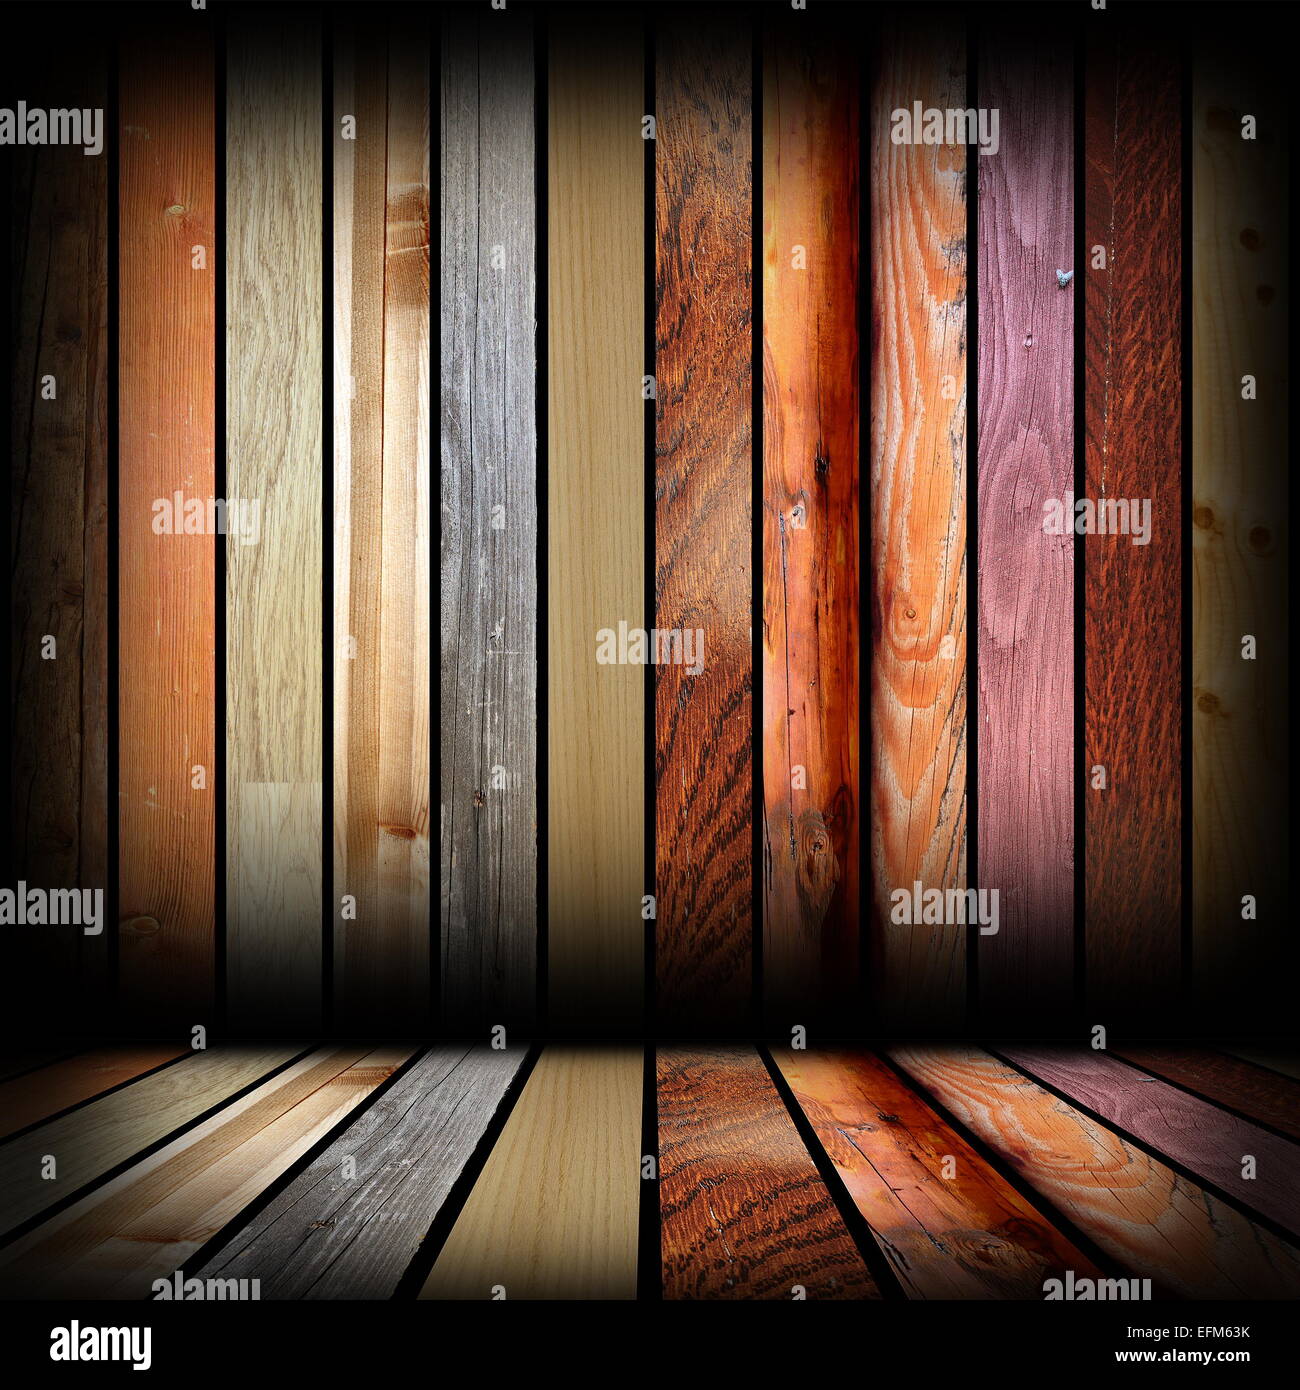 planks of different colors on  interior architectural backdrop, empty abstract room for your design Stock Photo